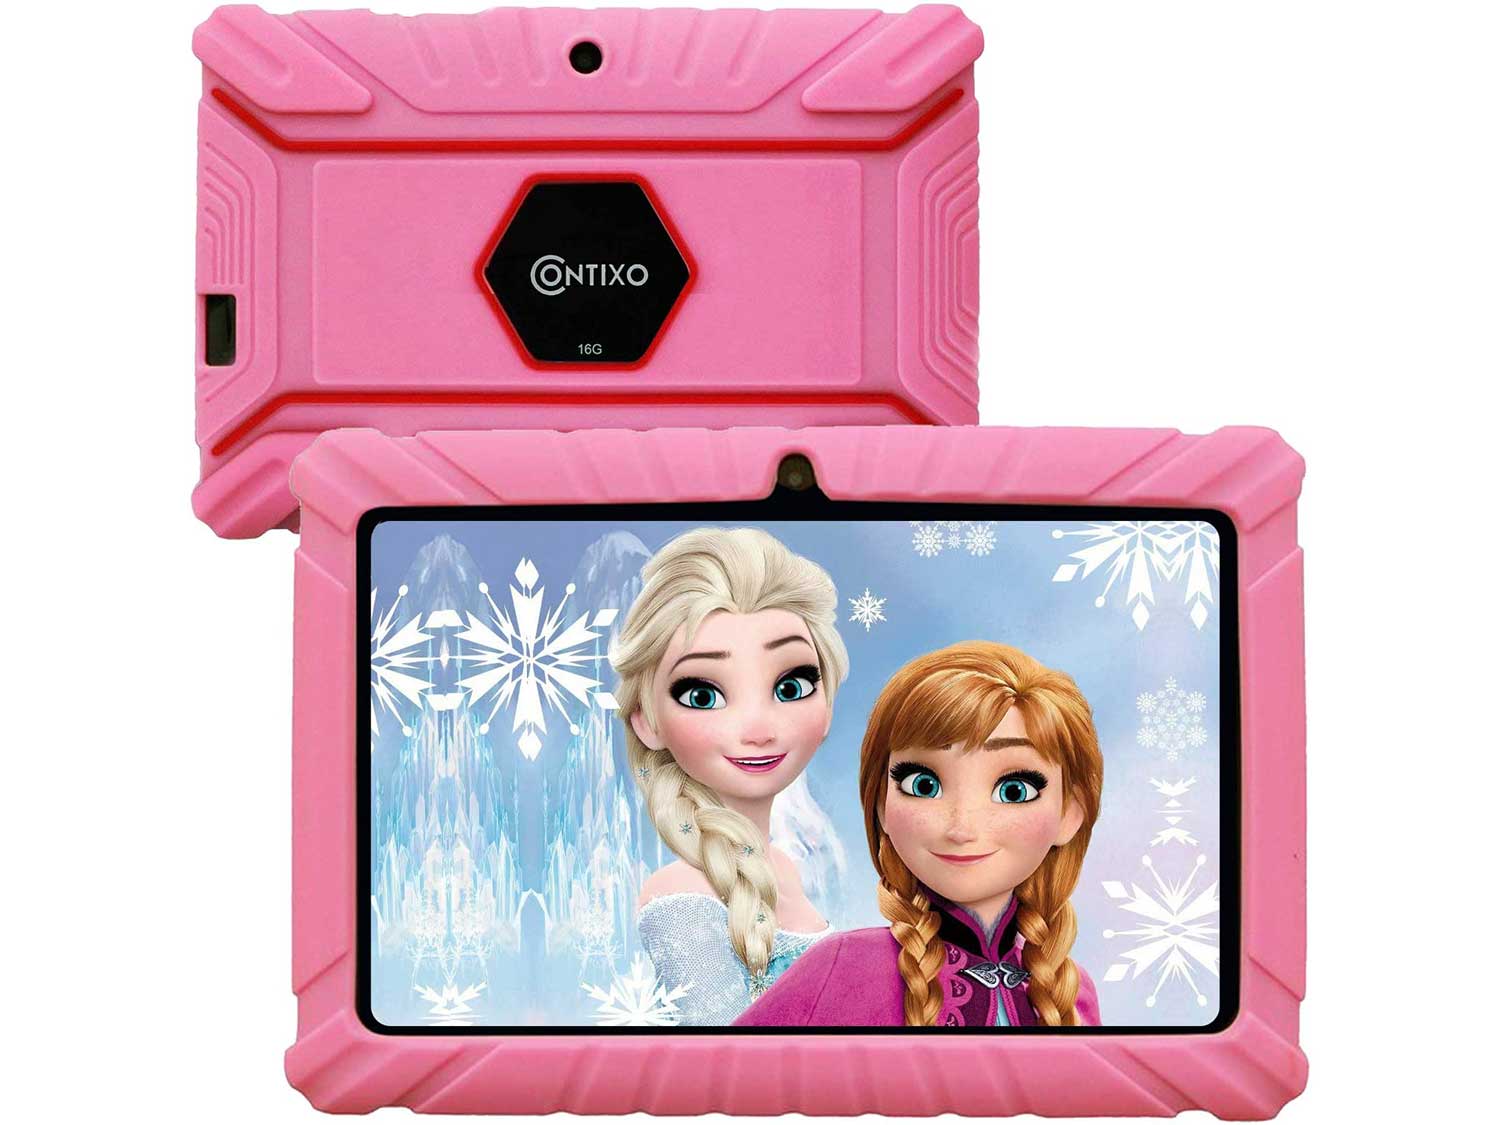 Contixo V8-2 7 inch Kids Tablets - Tablet for Kids with Parental Control - Android Tablet 16 GB HD Display Durable Case & Screen Protector WiFi Camera-Learning Toys, Pink